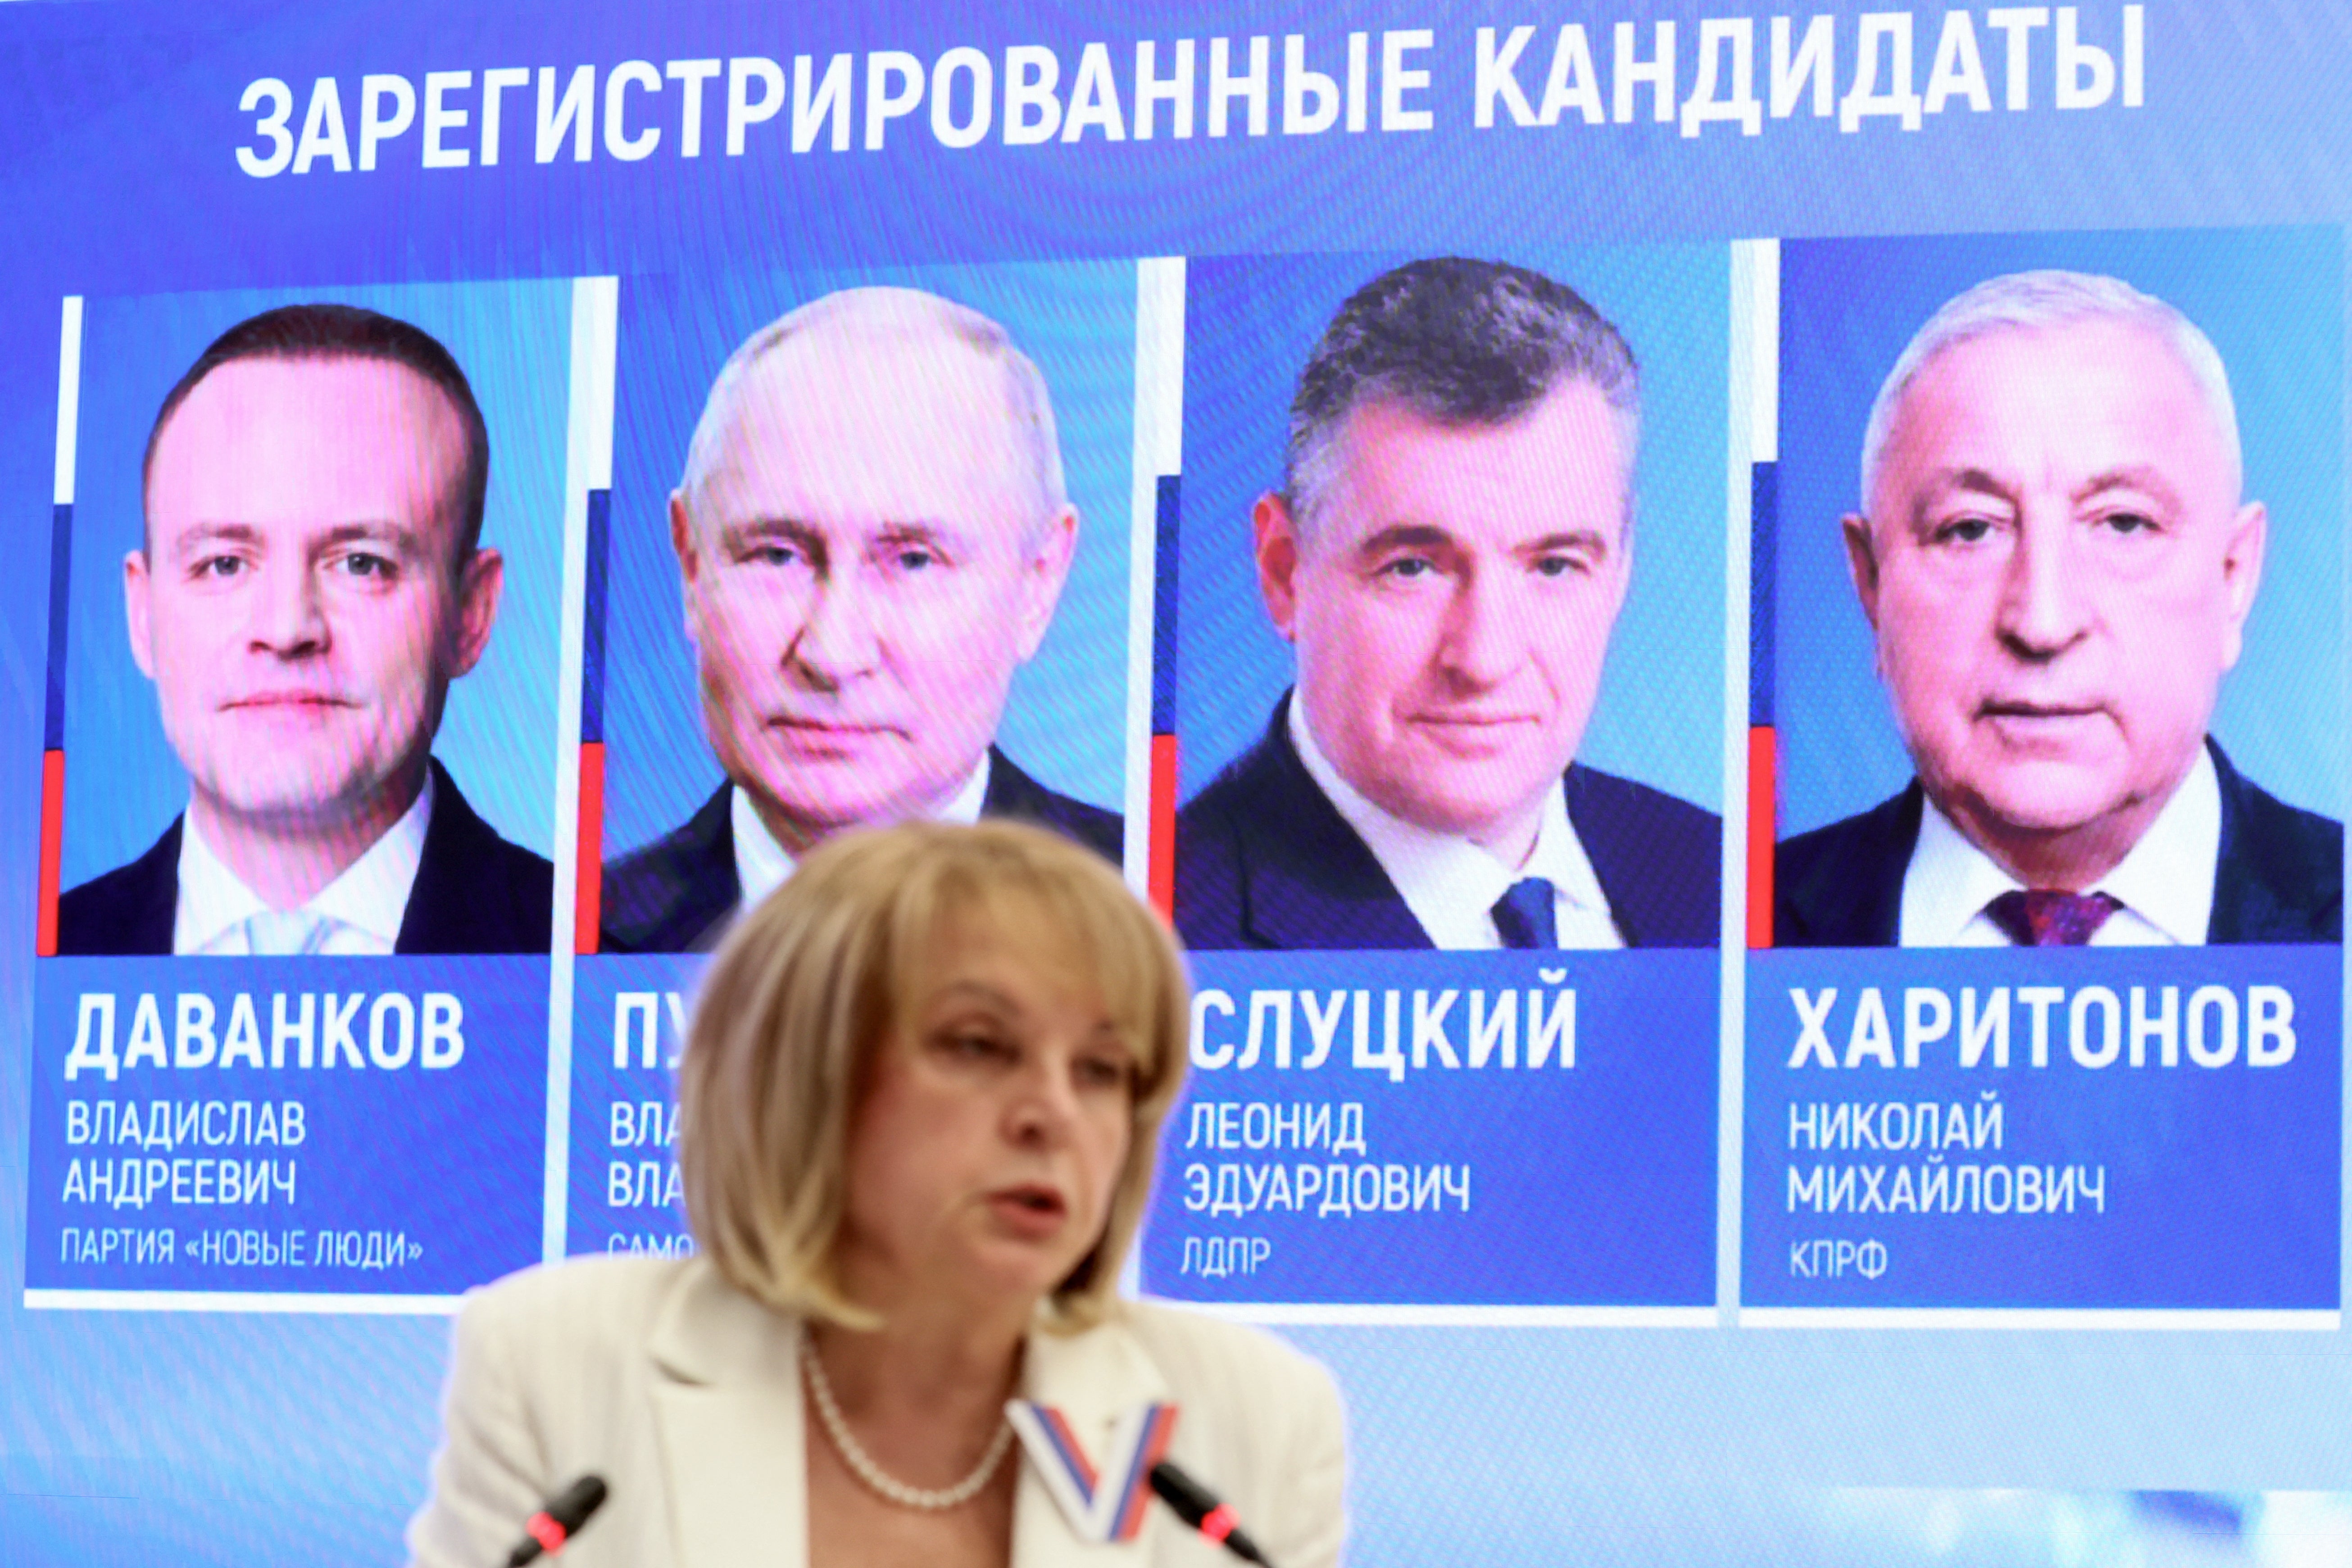 Russia's Central Electoral Commission (CEC) head Ella Pamfilova speaks at the opening of the CEC Information Centre in the run-up for the presidential election in Moscow